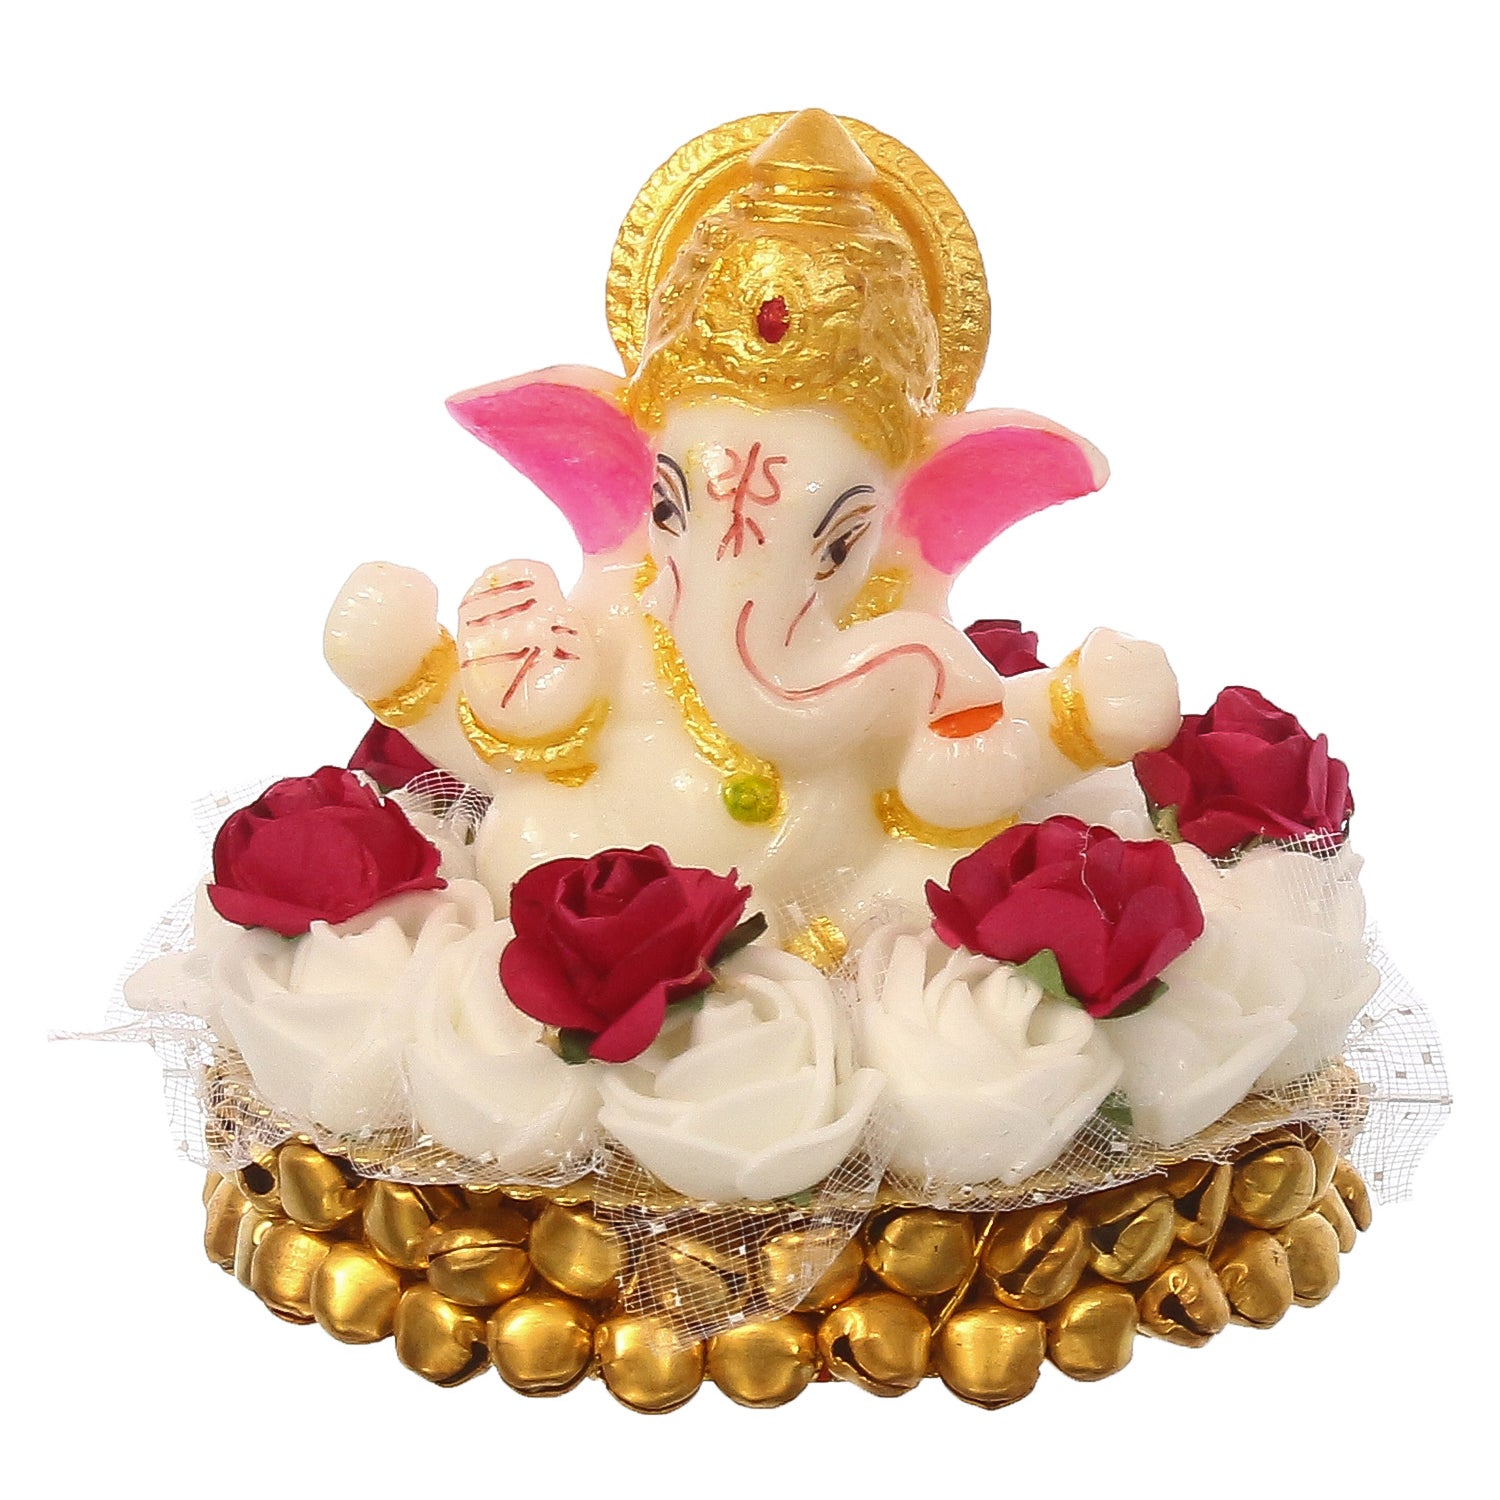 Lord Ganesha Idol on Decorative Handcrafted Plate with White Flowers 2